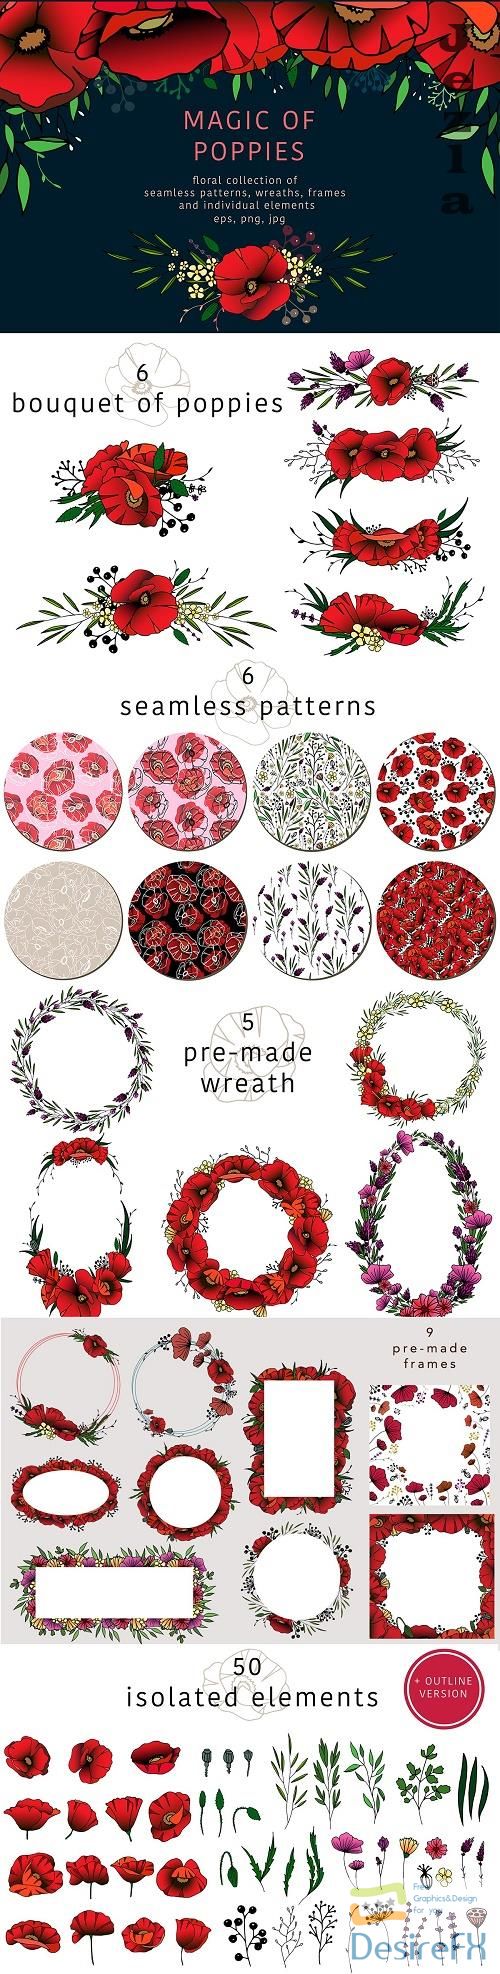 Magic of poppies - floral collection - 2135537